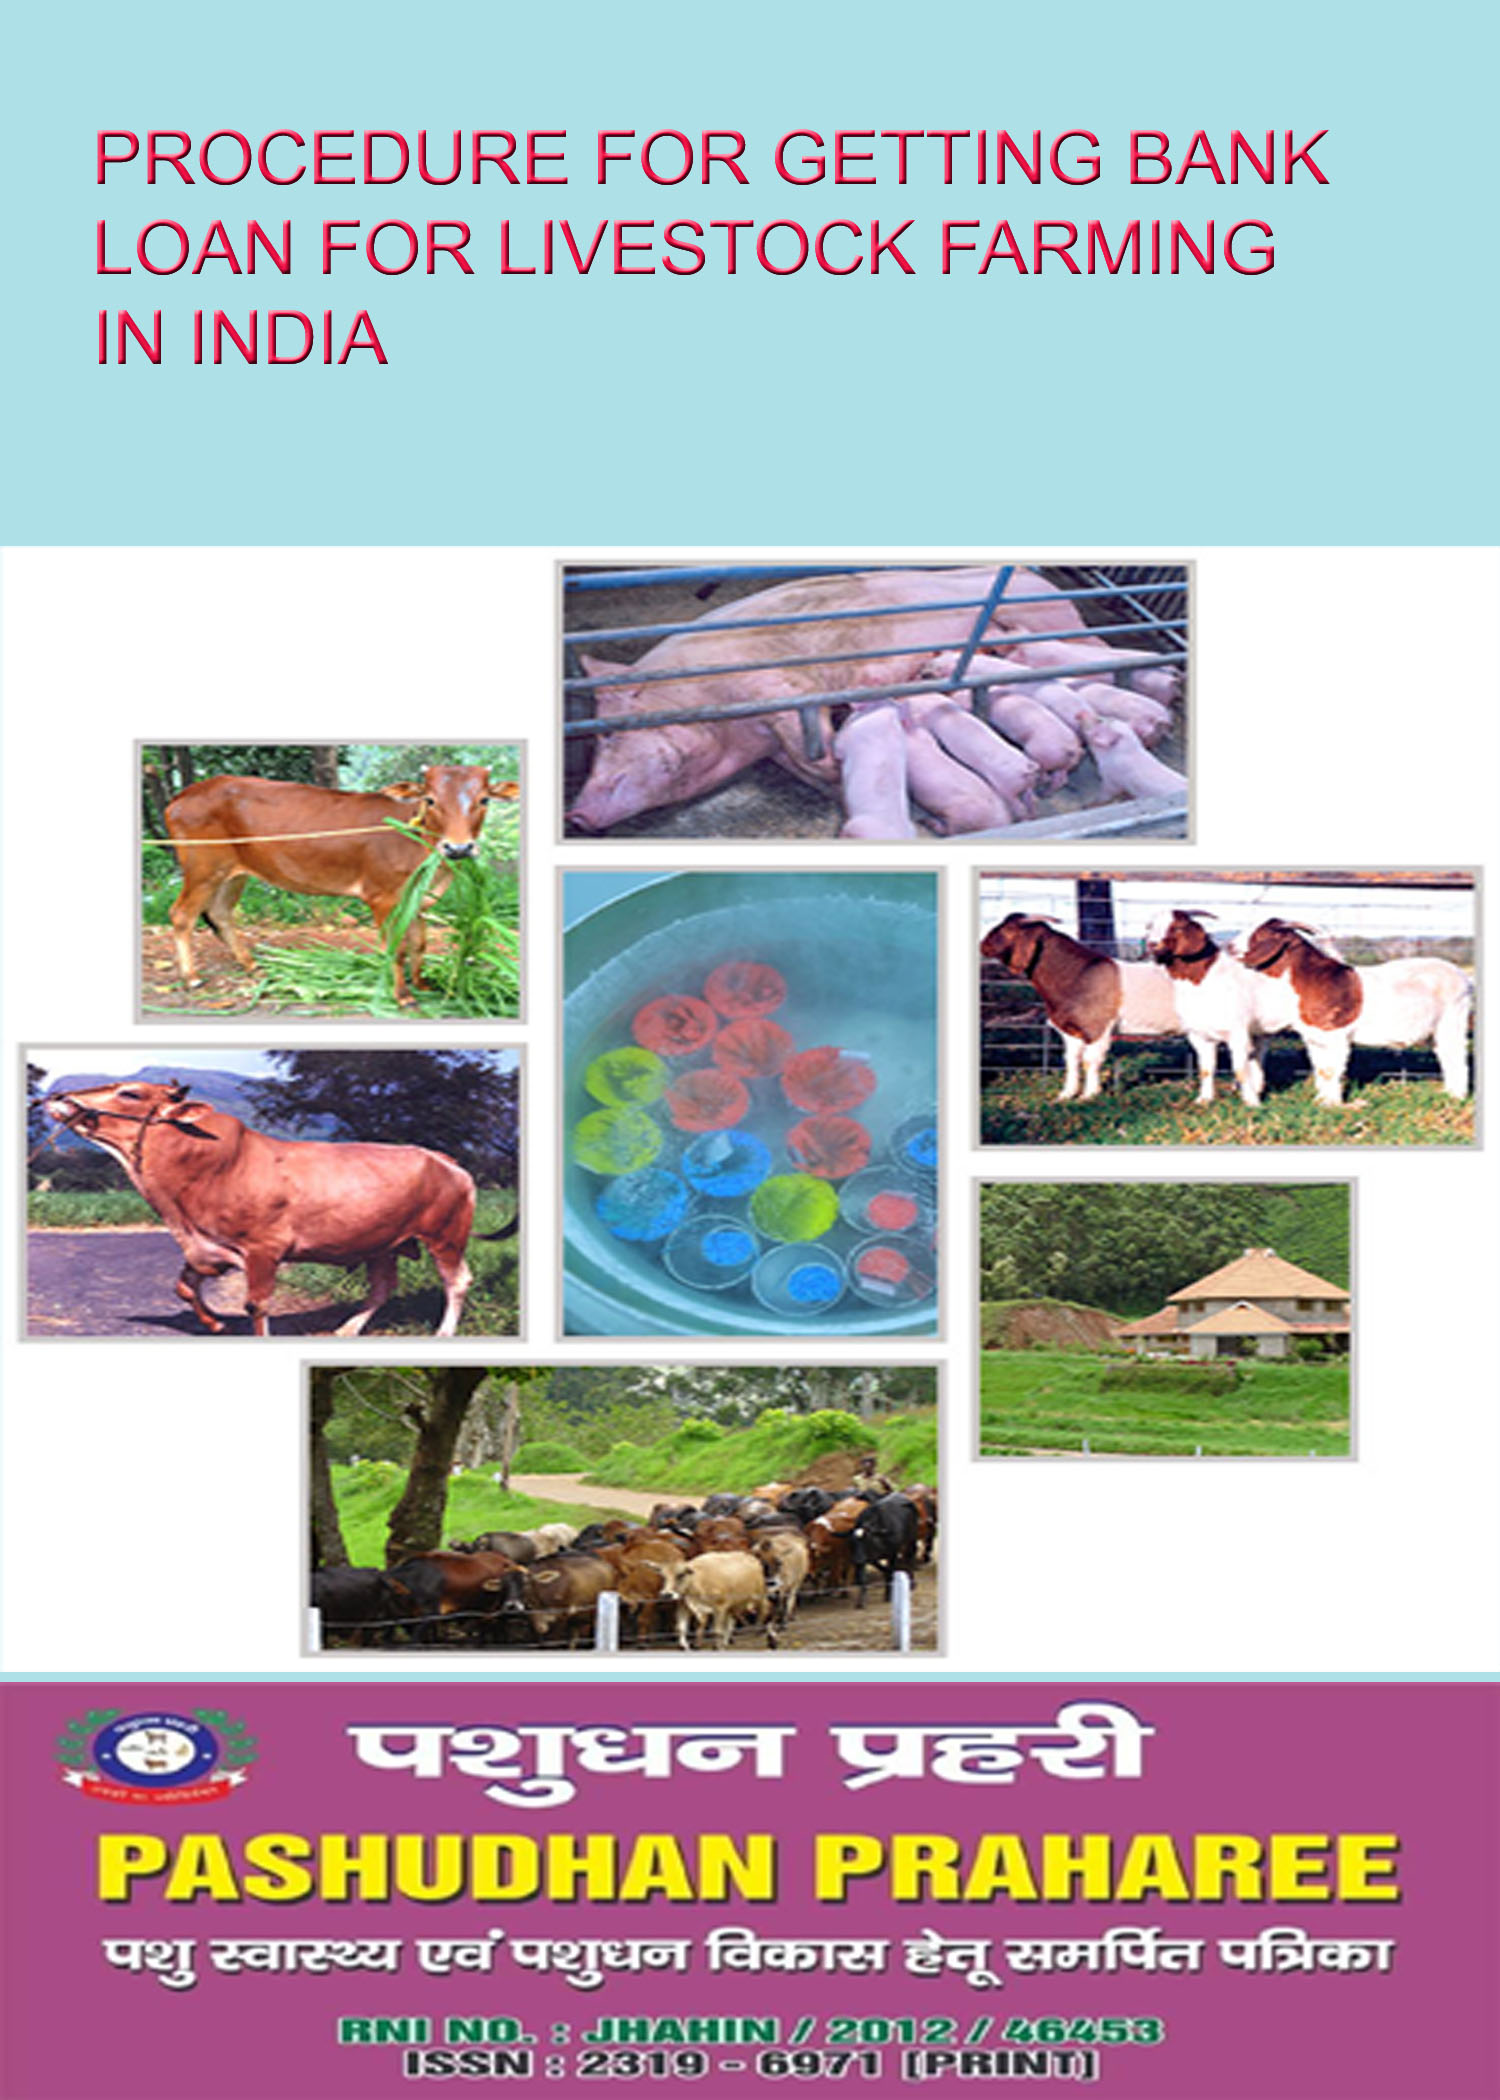 PROCEDURE FOR GETTING BANK LOAN FOR LIVESTOCK FARMING IN INDIA – Pashudhan  praharee